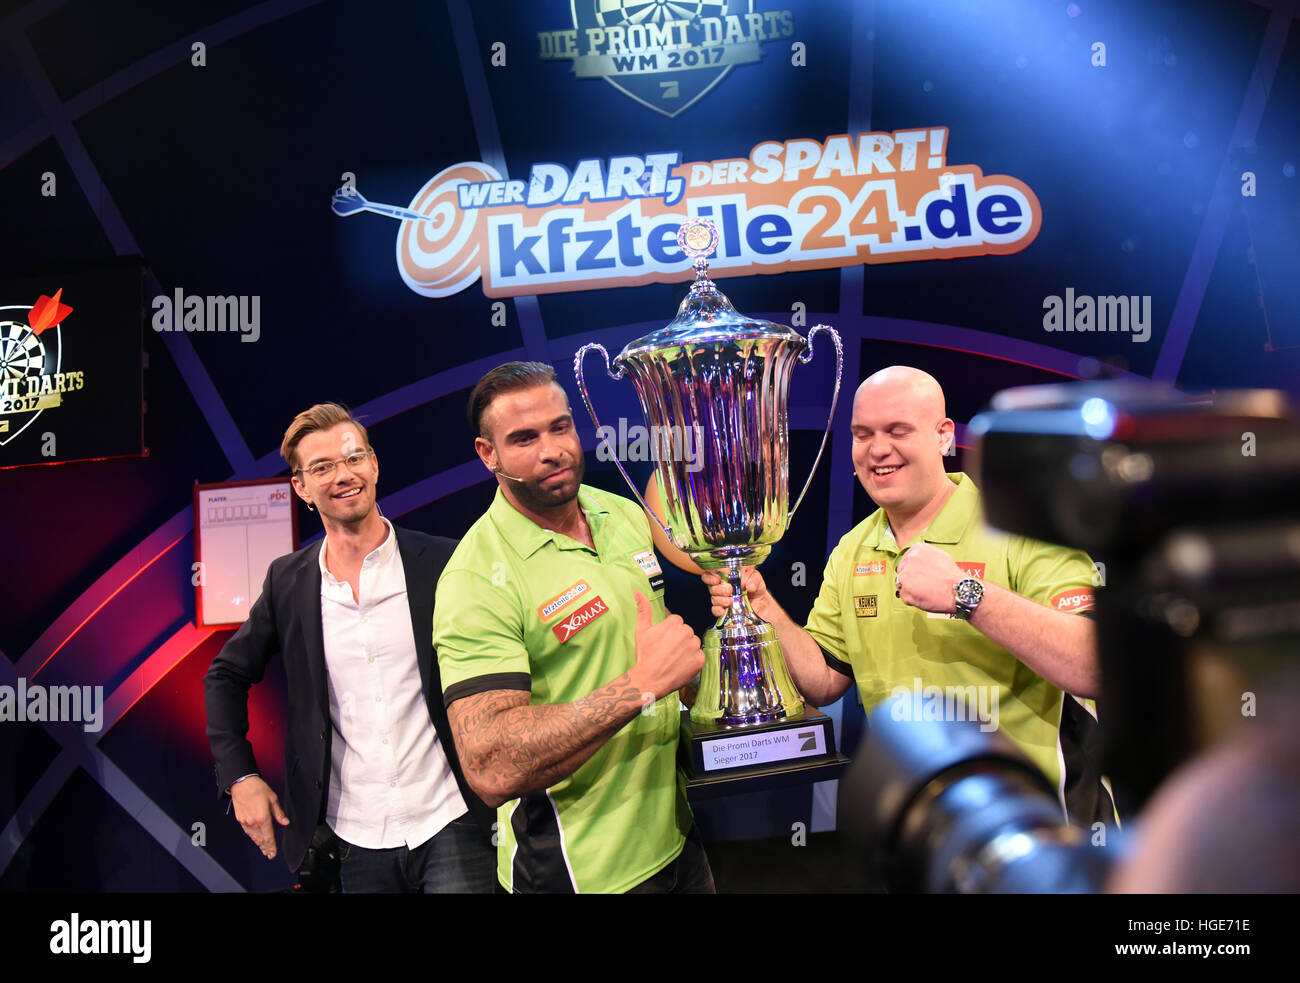 Wrestling Star Time Wiese (M) and Dutch Darts world champion Michael van  Gerwen (m-R) celebrate their win with a trophy during the 'Promi-Darts-WM'  event in Duesseldorf, Germany, 07 January 2017. To the